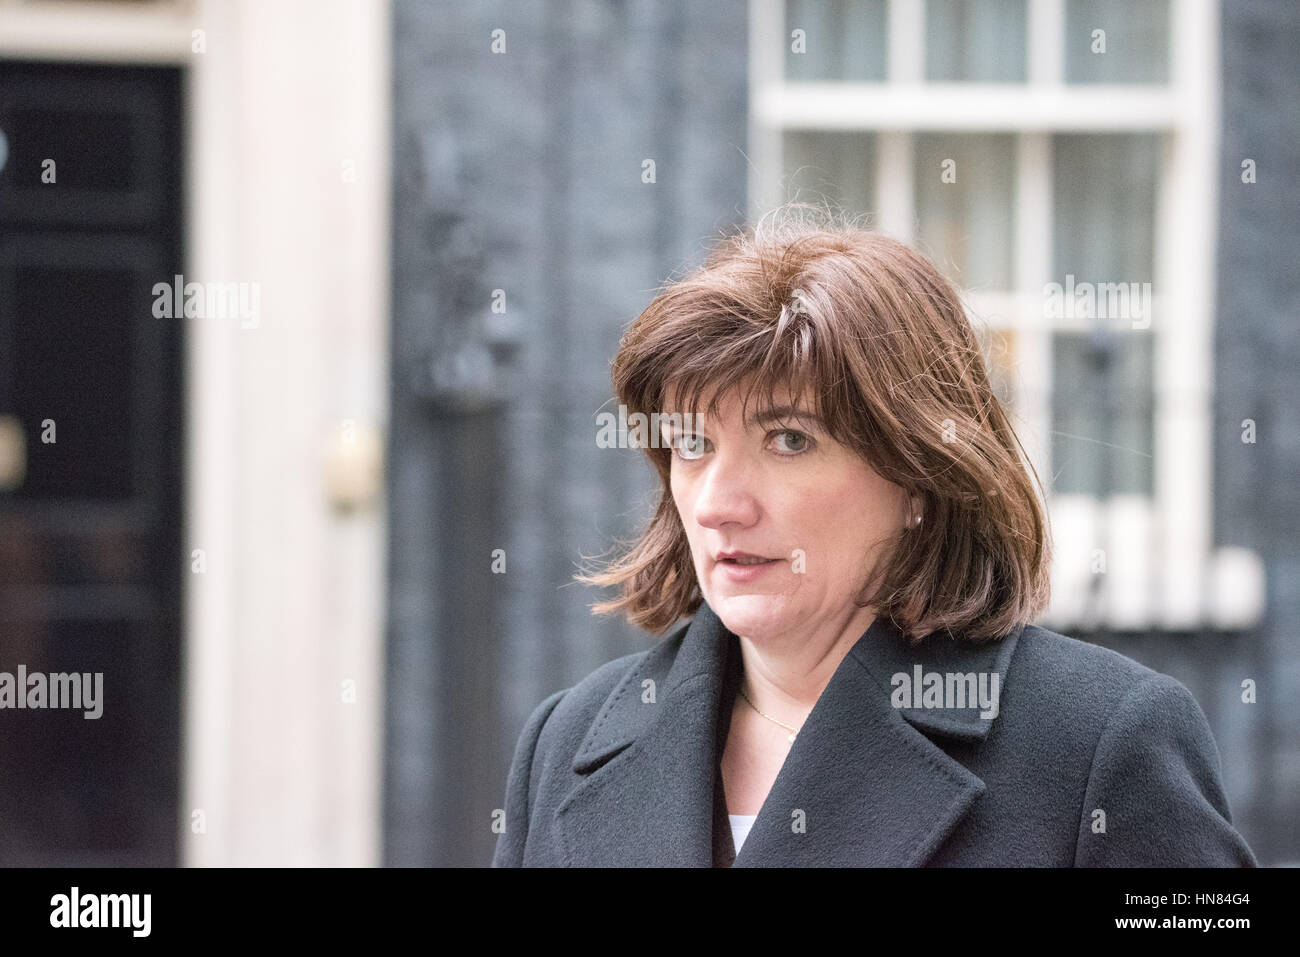 London, UK. 9th February 2017. Protesters hand a petition to 10 Downing Street against the closure of Glenfields Childrens Heart unit. with MP Nicky Morgan Credit: Ian Davidson/Alamy Live News Stock Photo